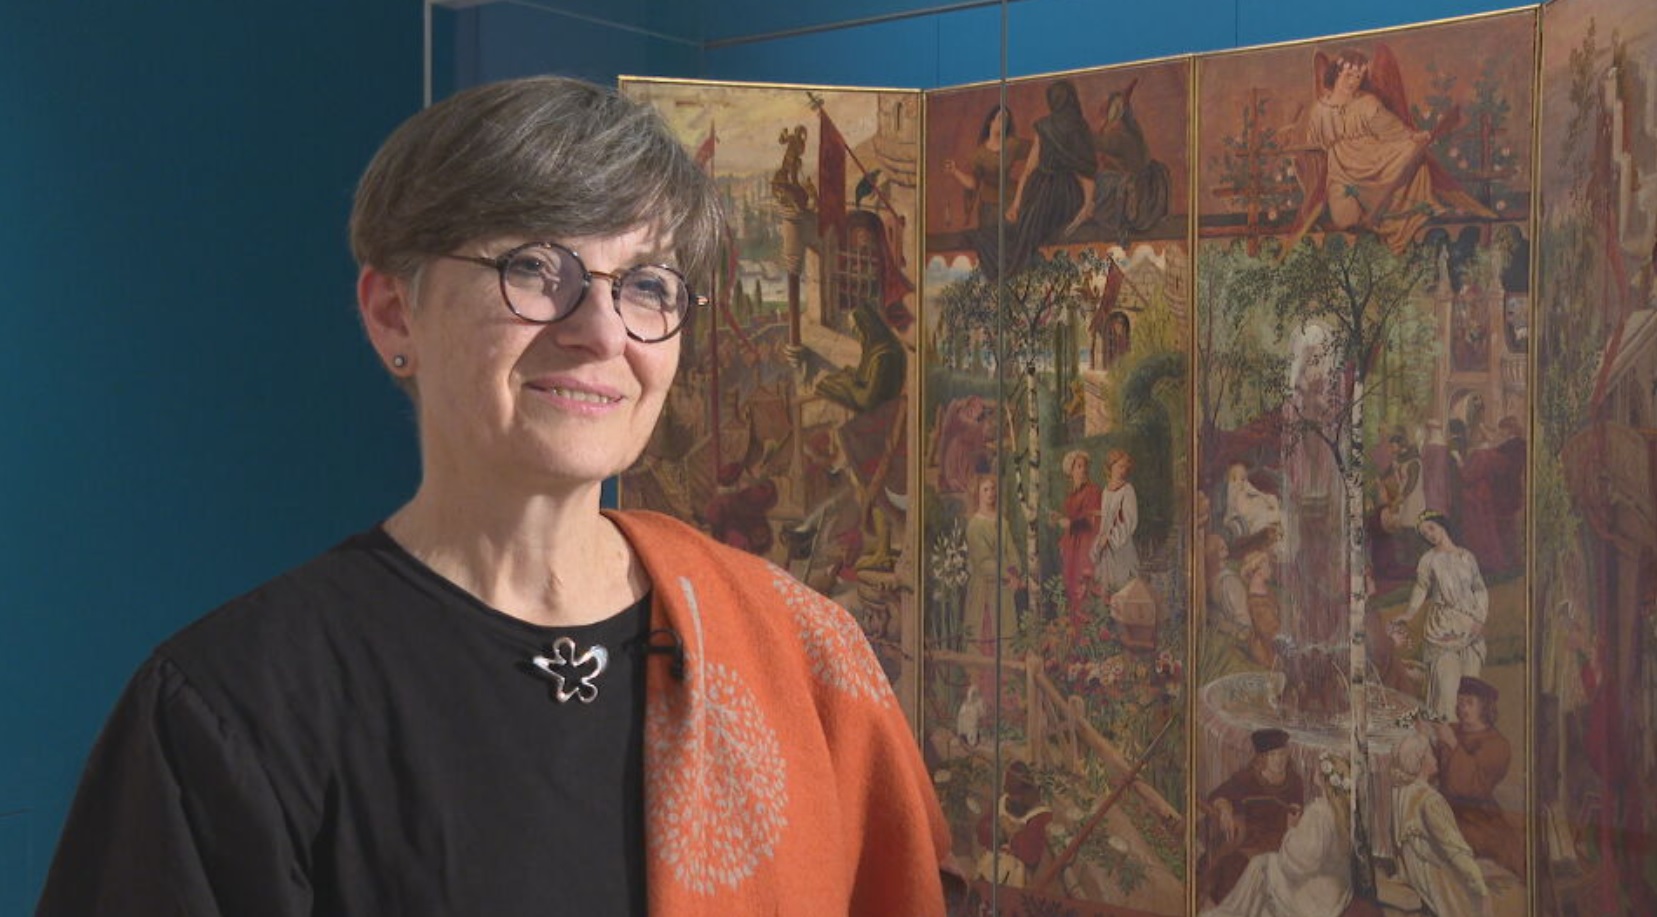 Dr Tricia Allerston discusses the King's Quair screen, on display for the first time since the 1960s